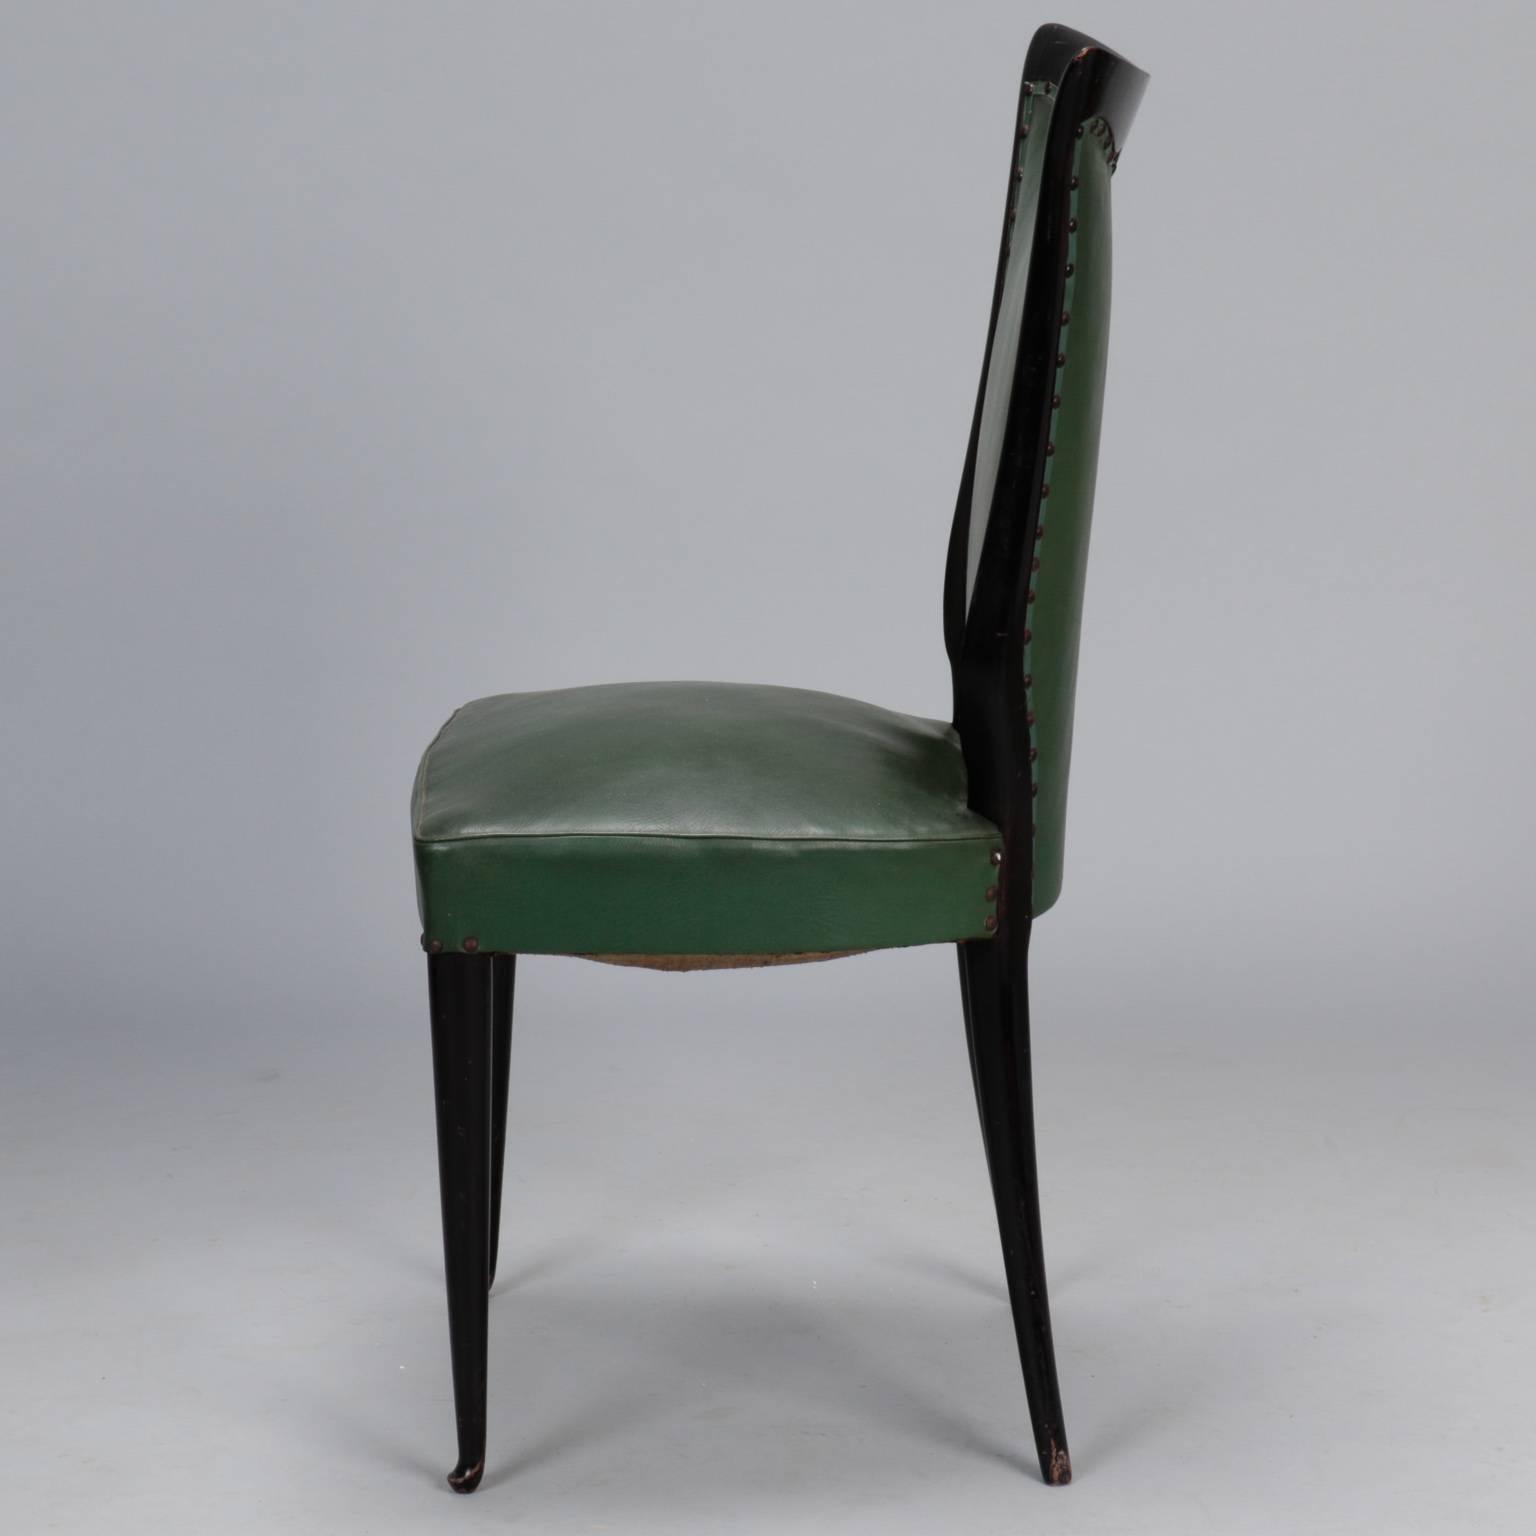 Mid-Century set of six Italian dining chairs date from late 1950s and are attributed to Osvaldo Borsani. Chairs have wood frames with espresso colored stained finish, tapered legs, curvy seat backs with flared tops and original green faux leather